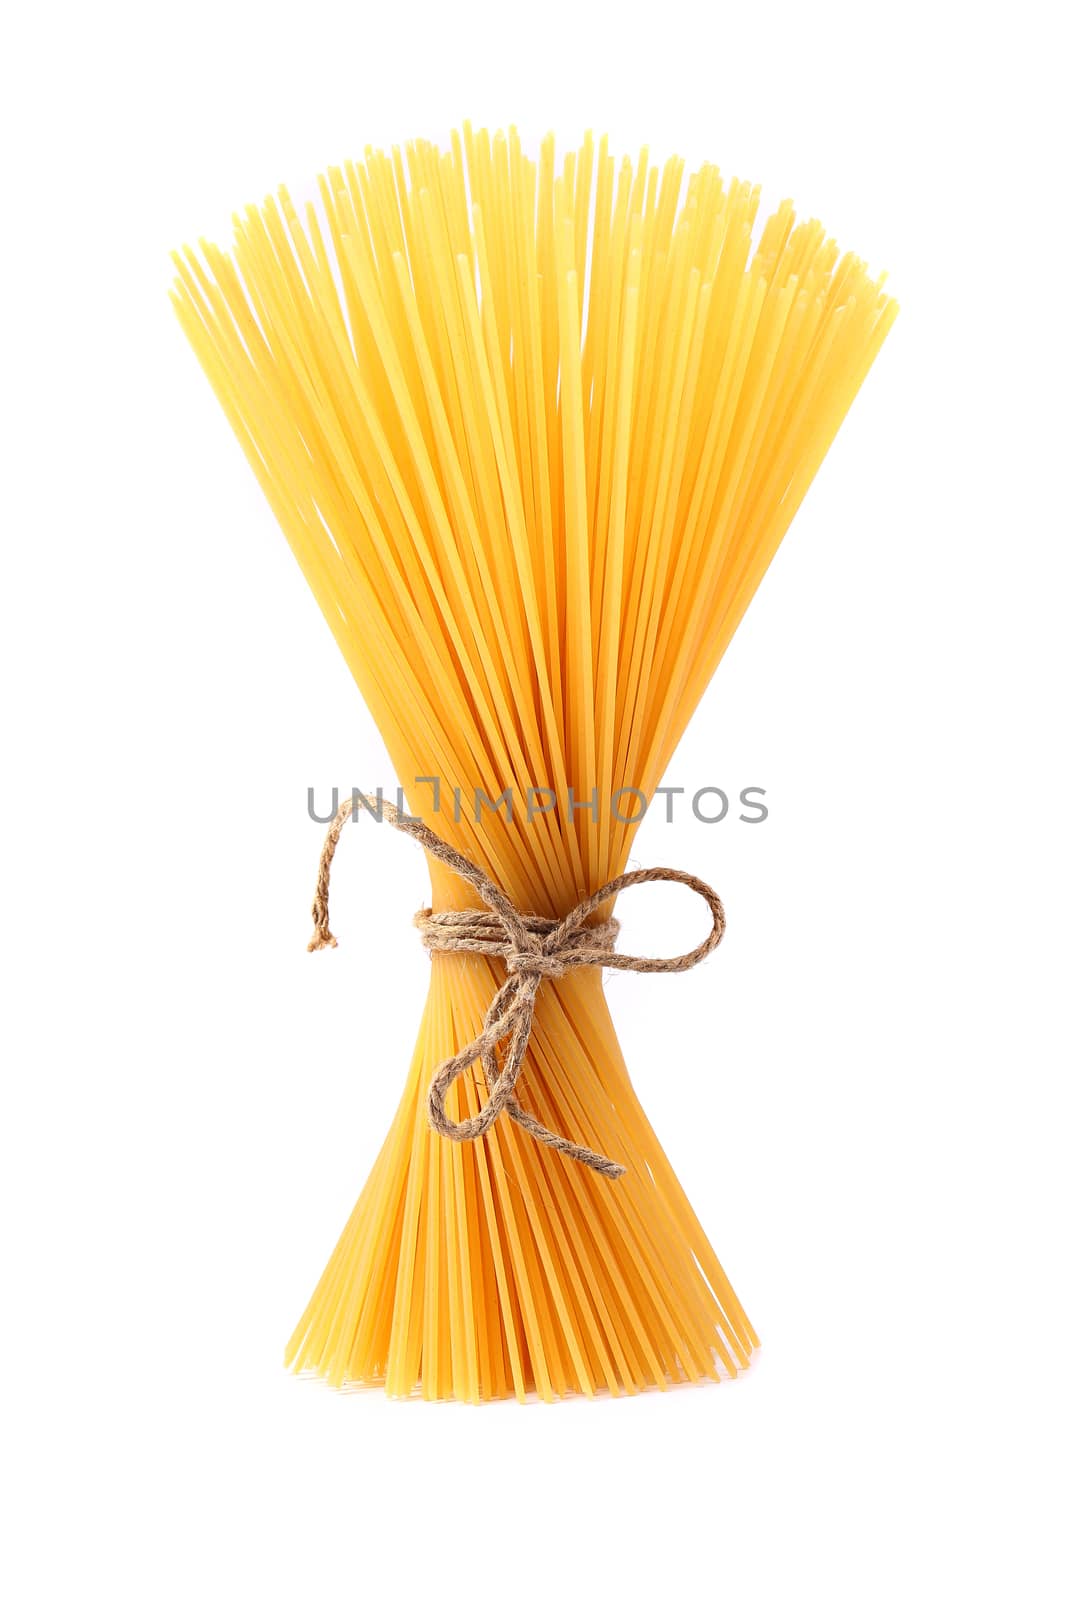 Bunch of spaghetti  isolated on white background by indigolotos